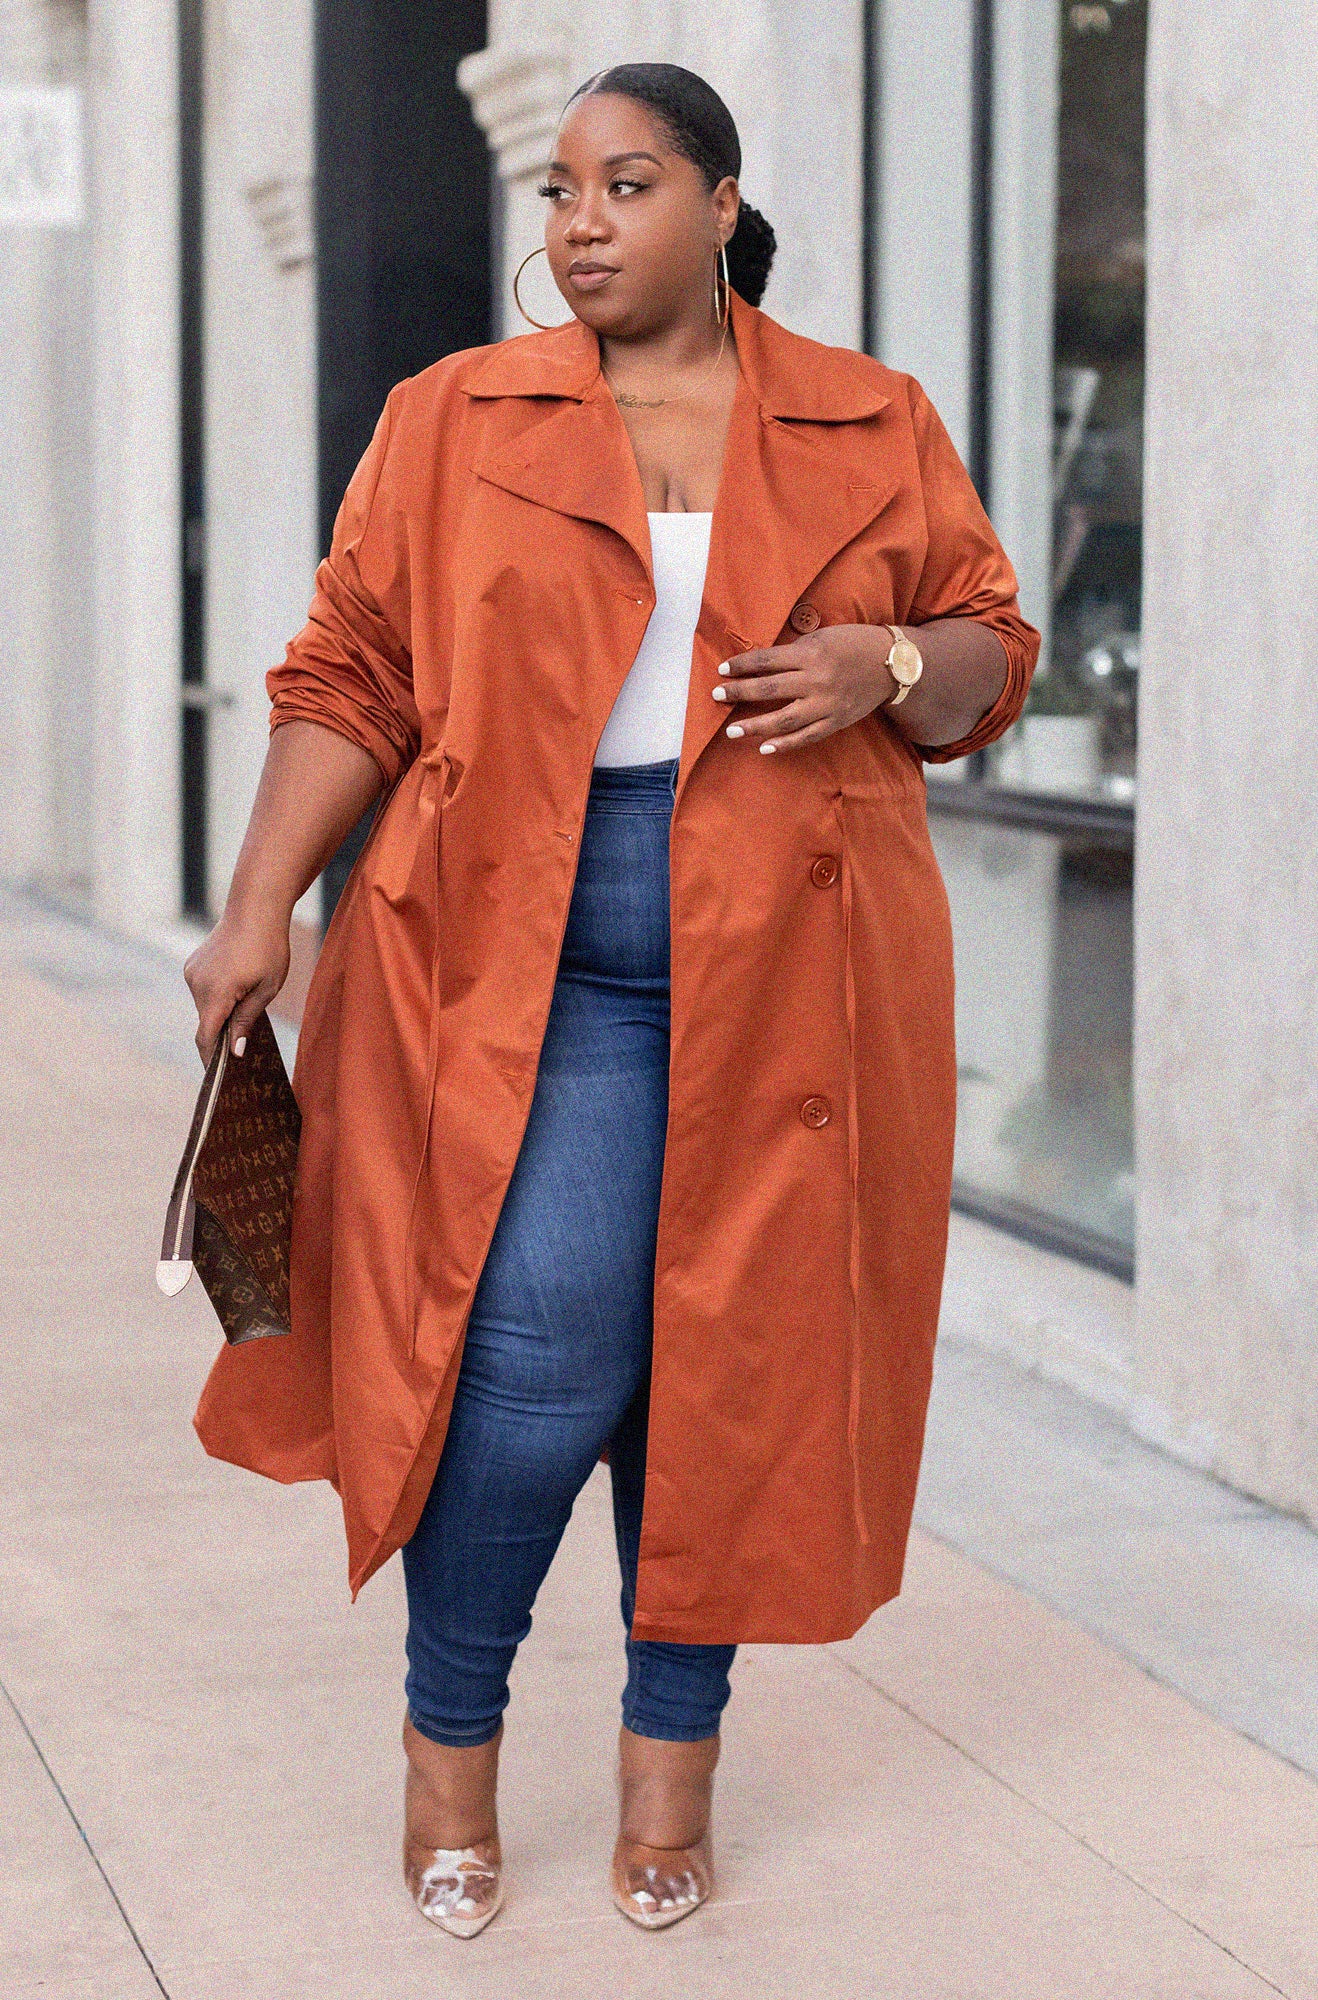 Brown Rebdolls Classic Trench Coat Plus Sizes @lacenleopard x Rebdolls